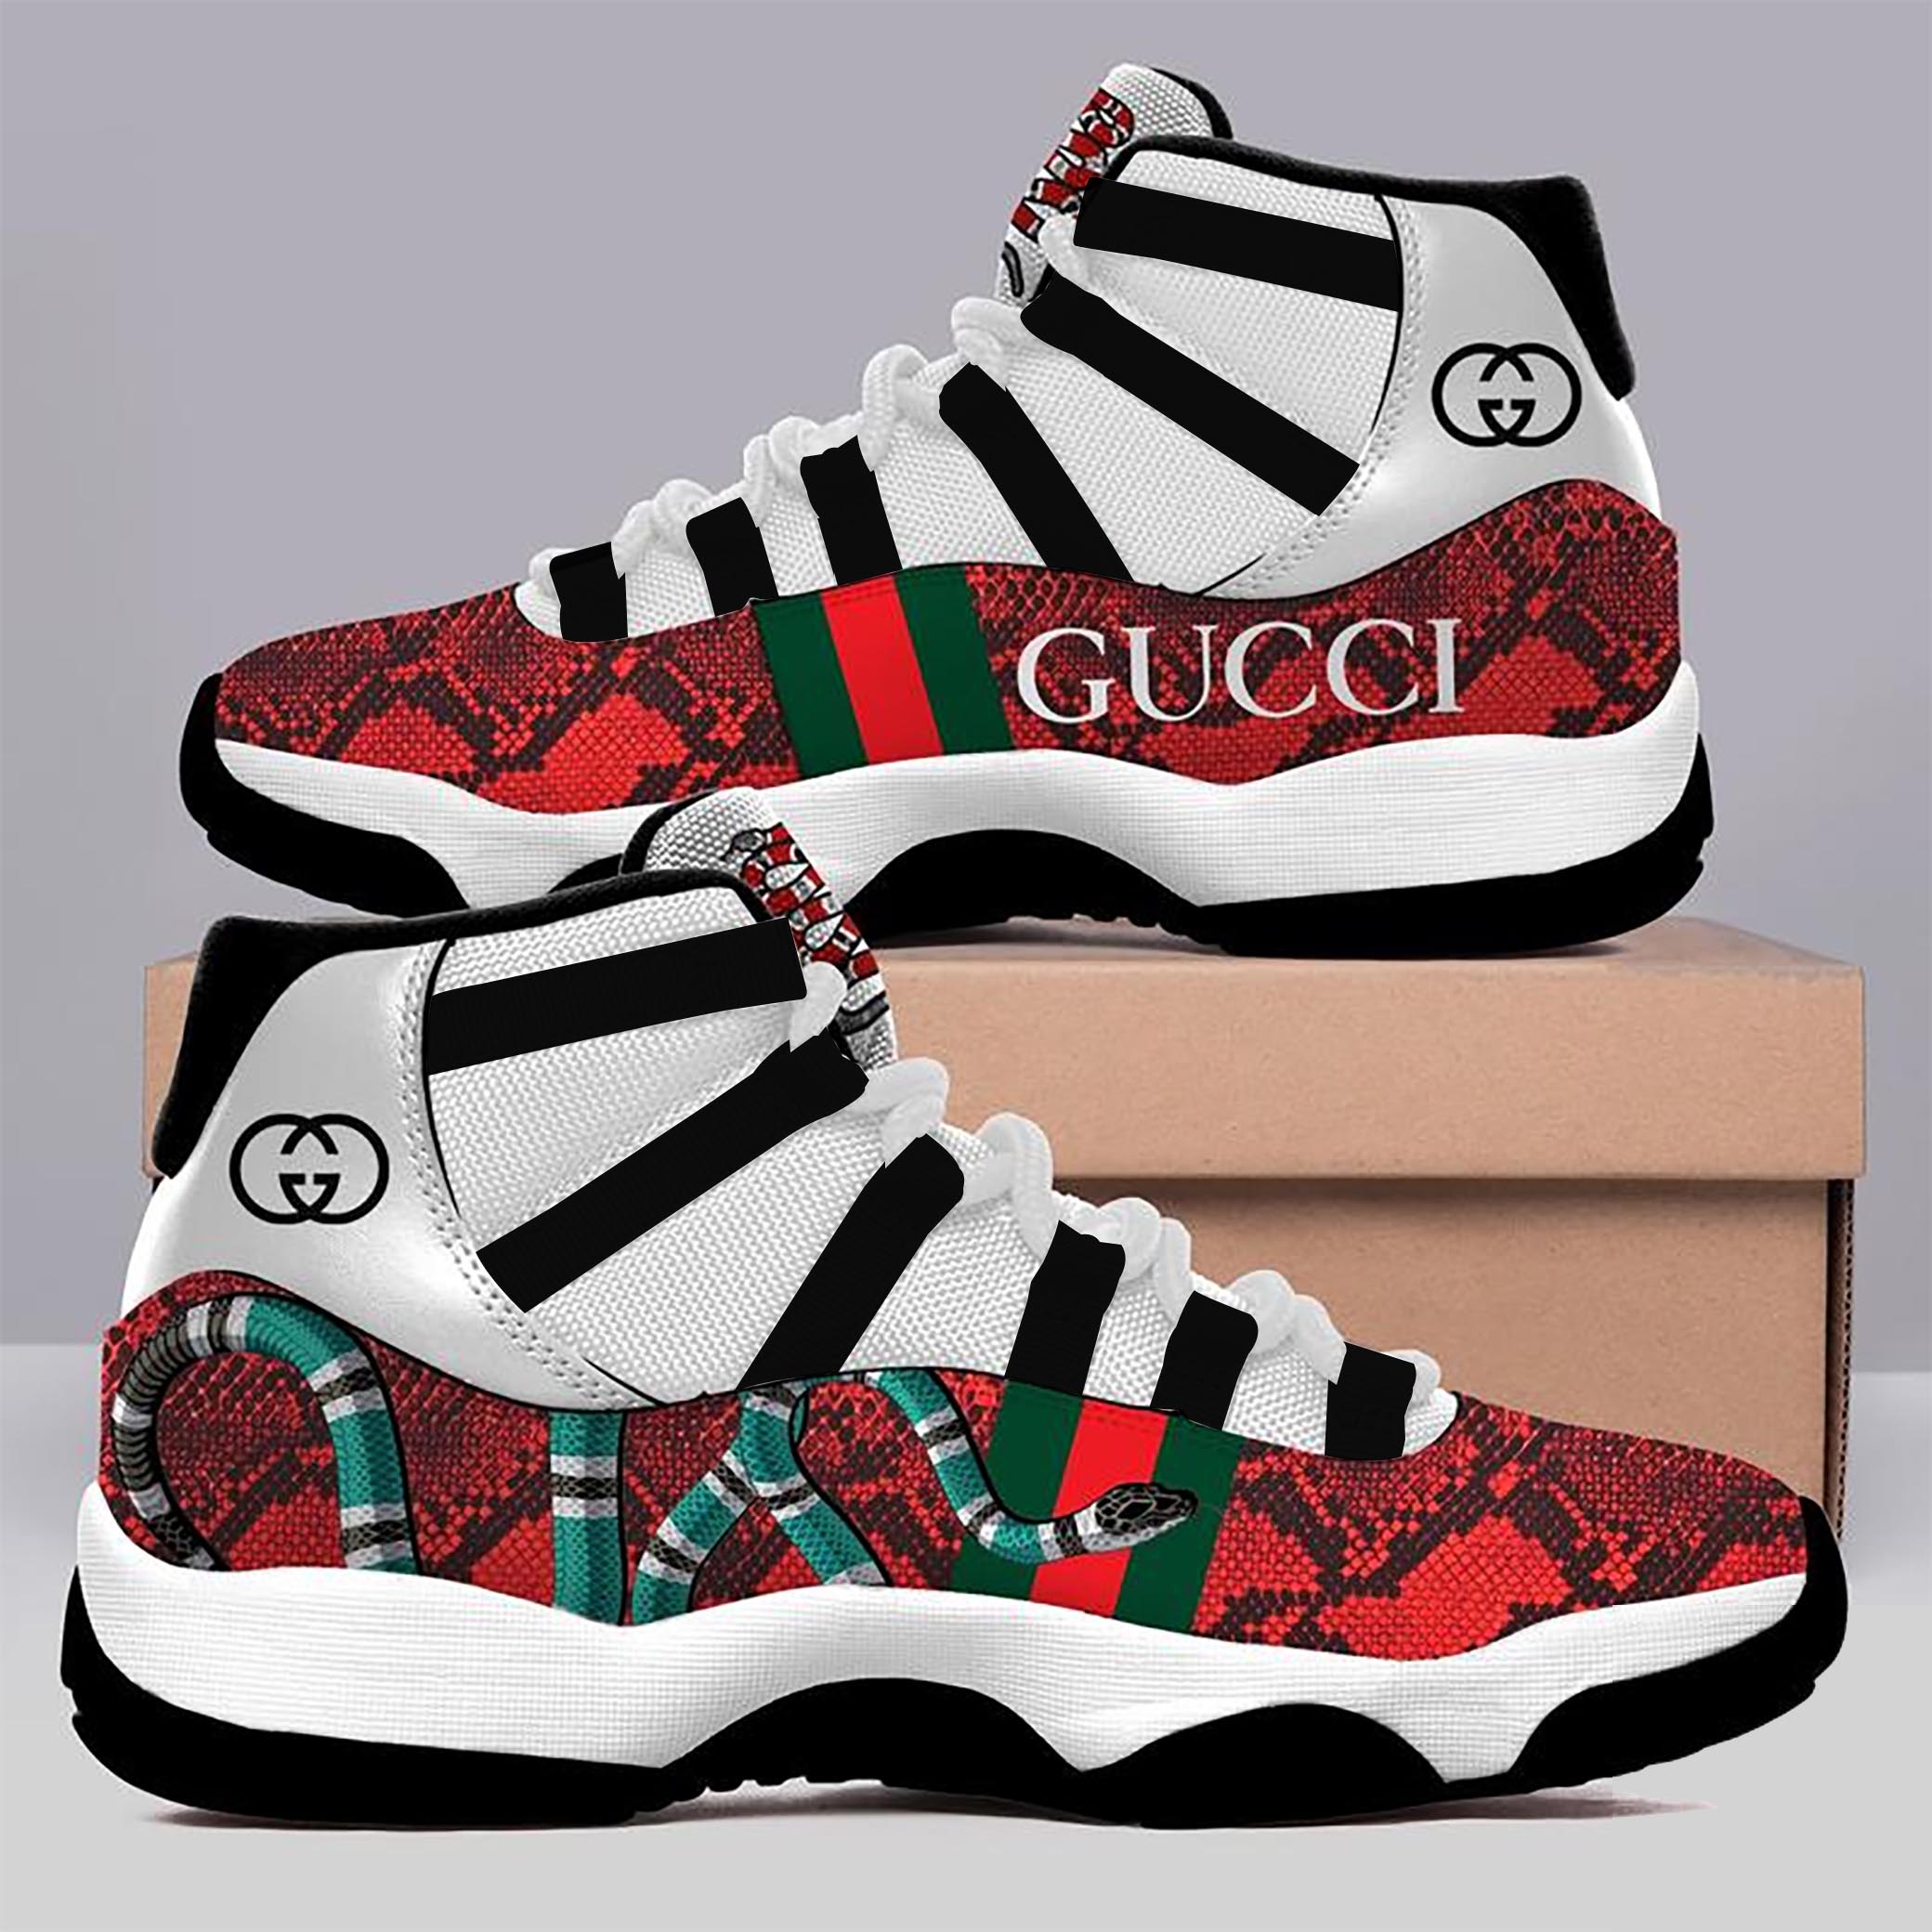 Gucci Red Snake Air Jordan 11 Sneakers Shoes Hot 2022 Gifts For Men Women HT